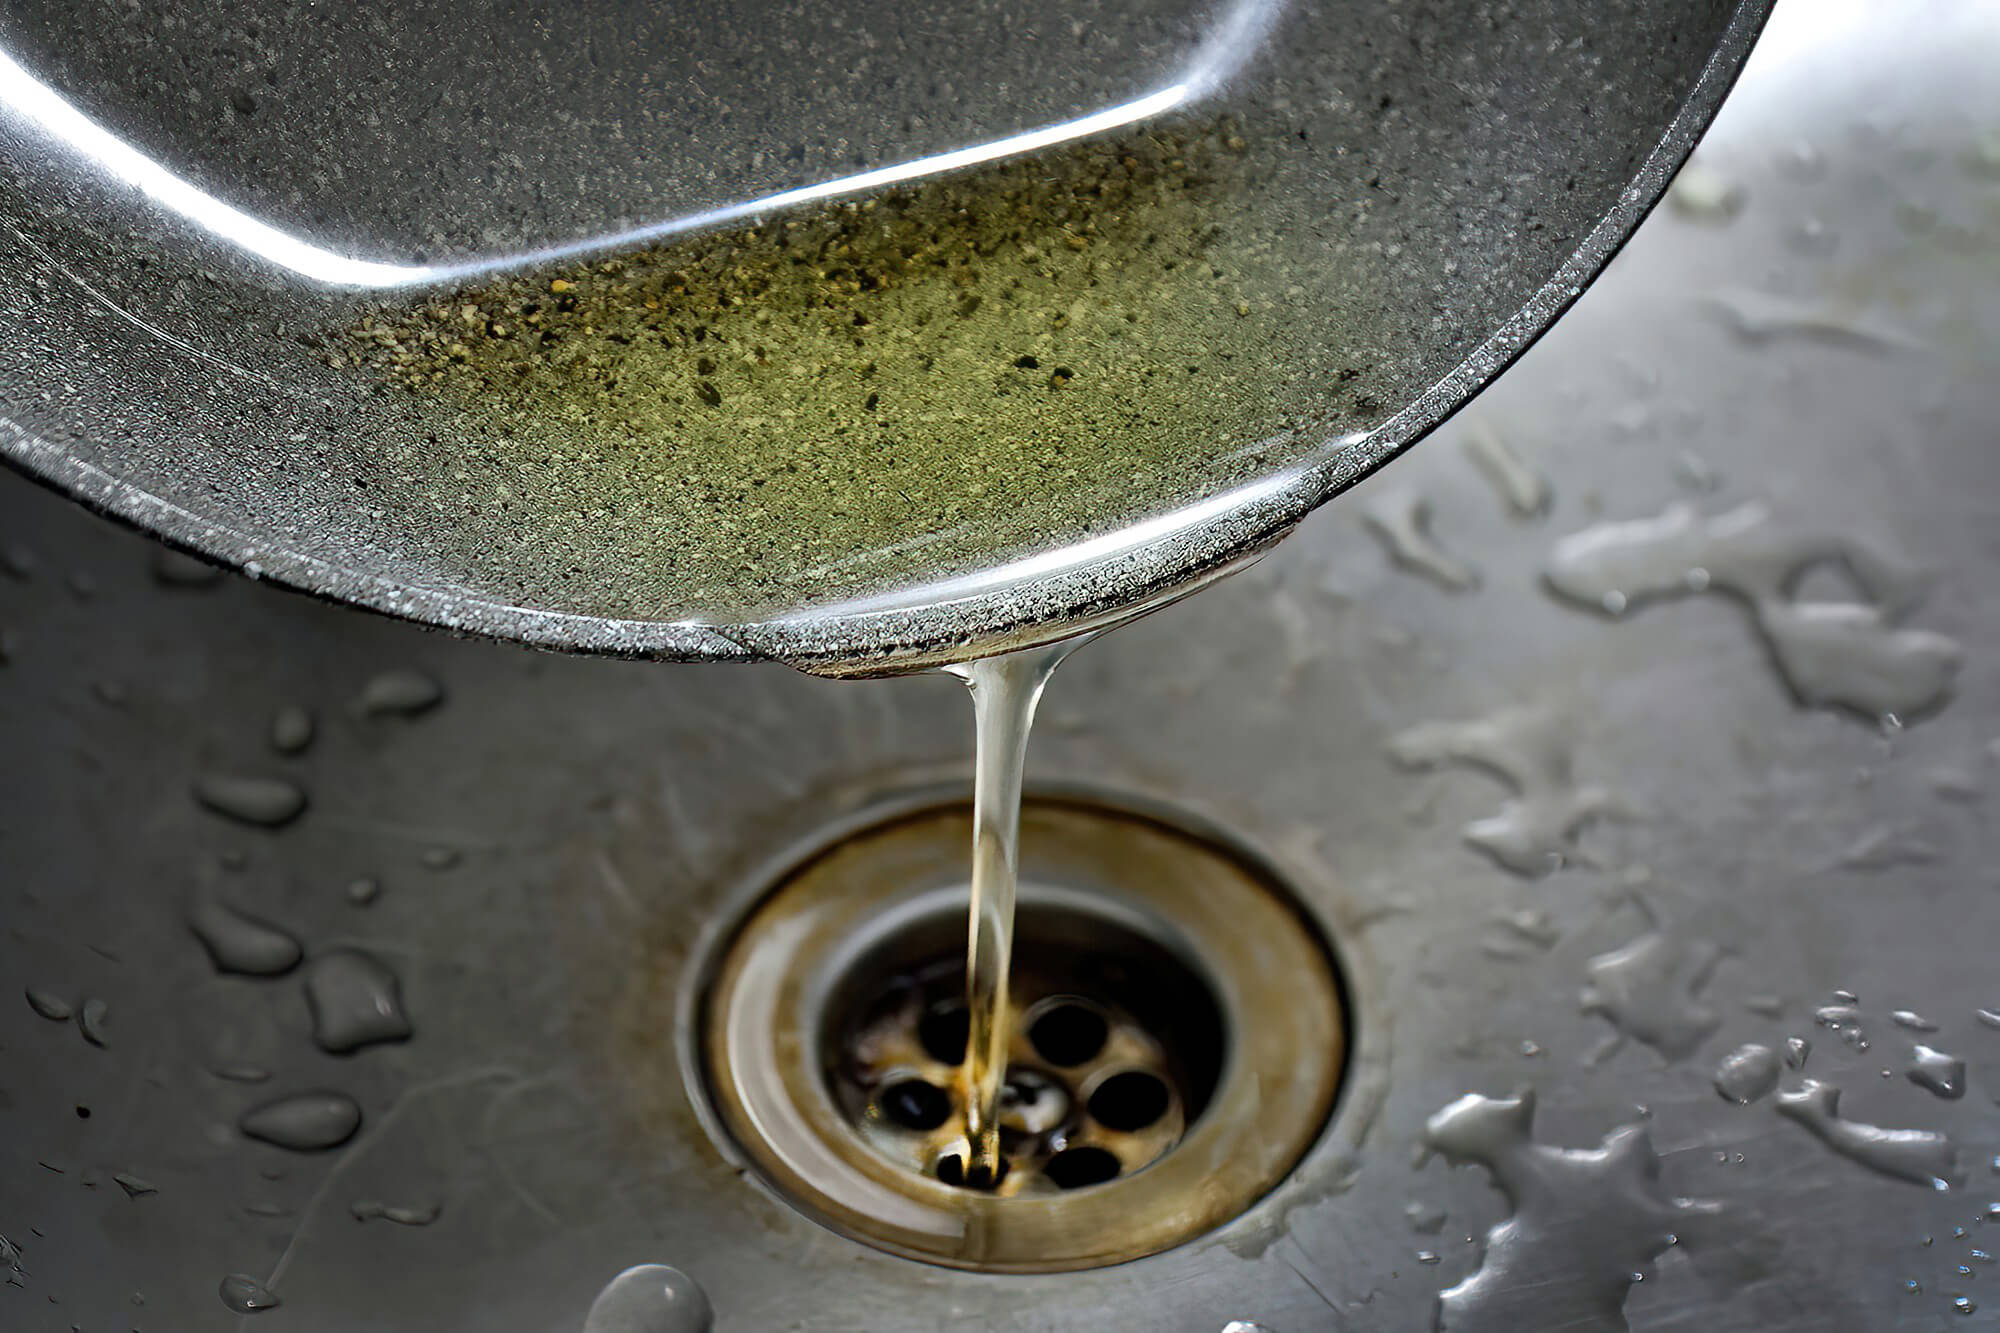 How to Get Grease Out of Your Sink Drain